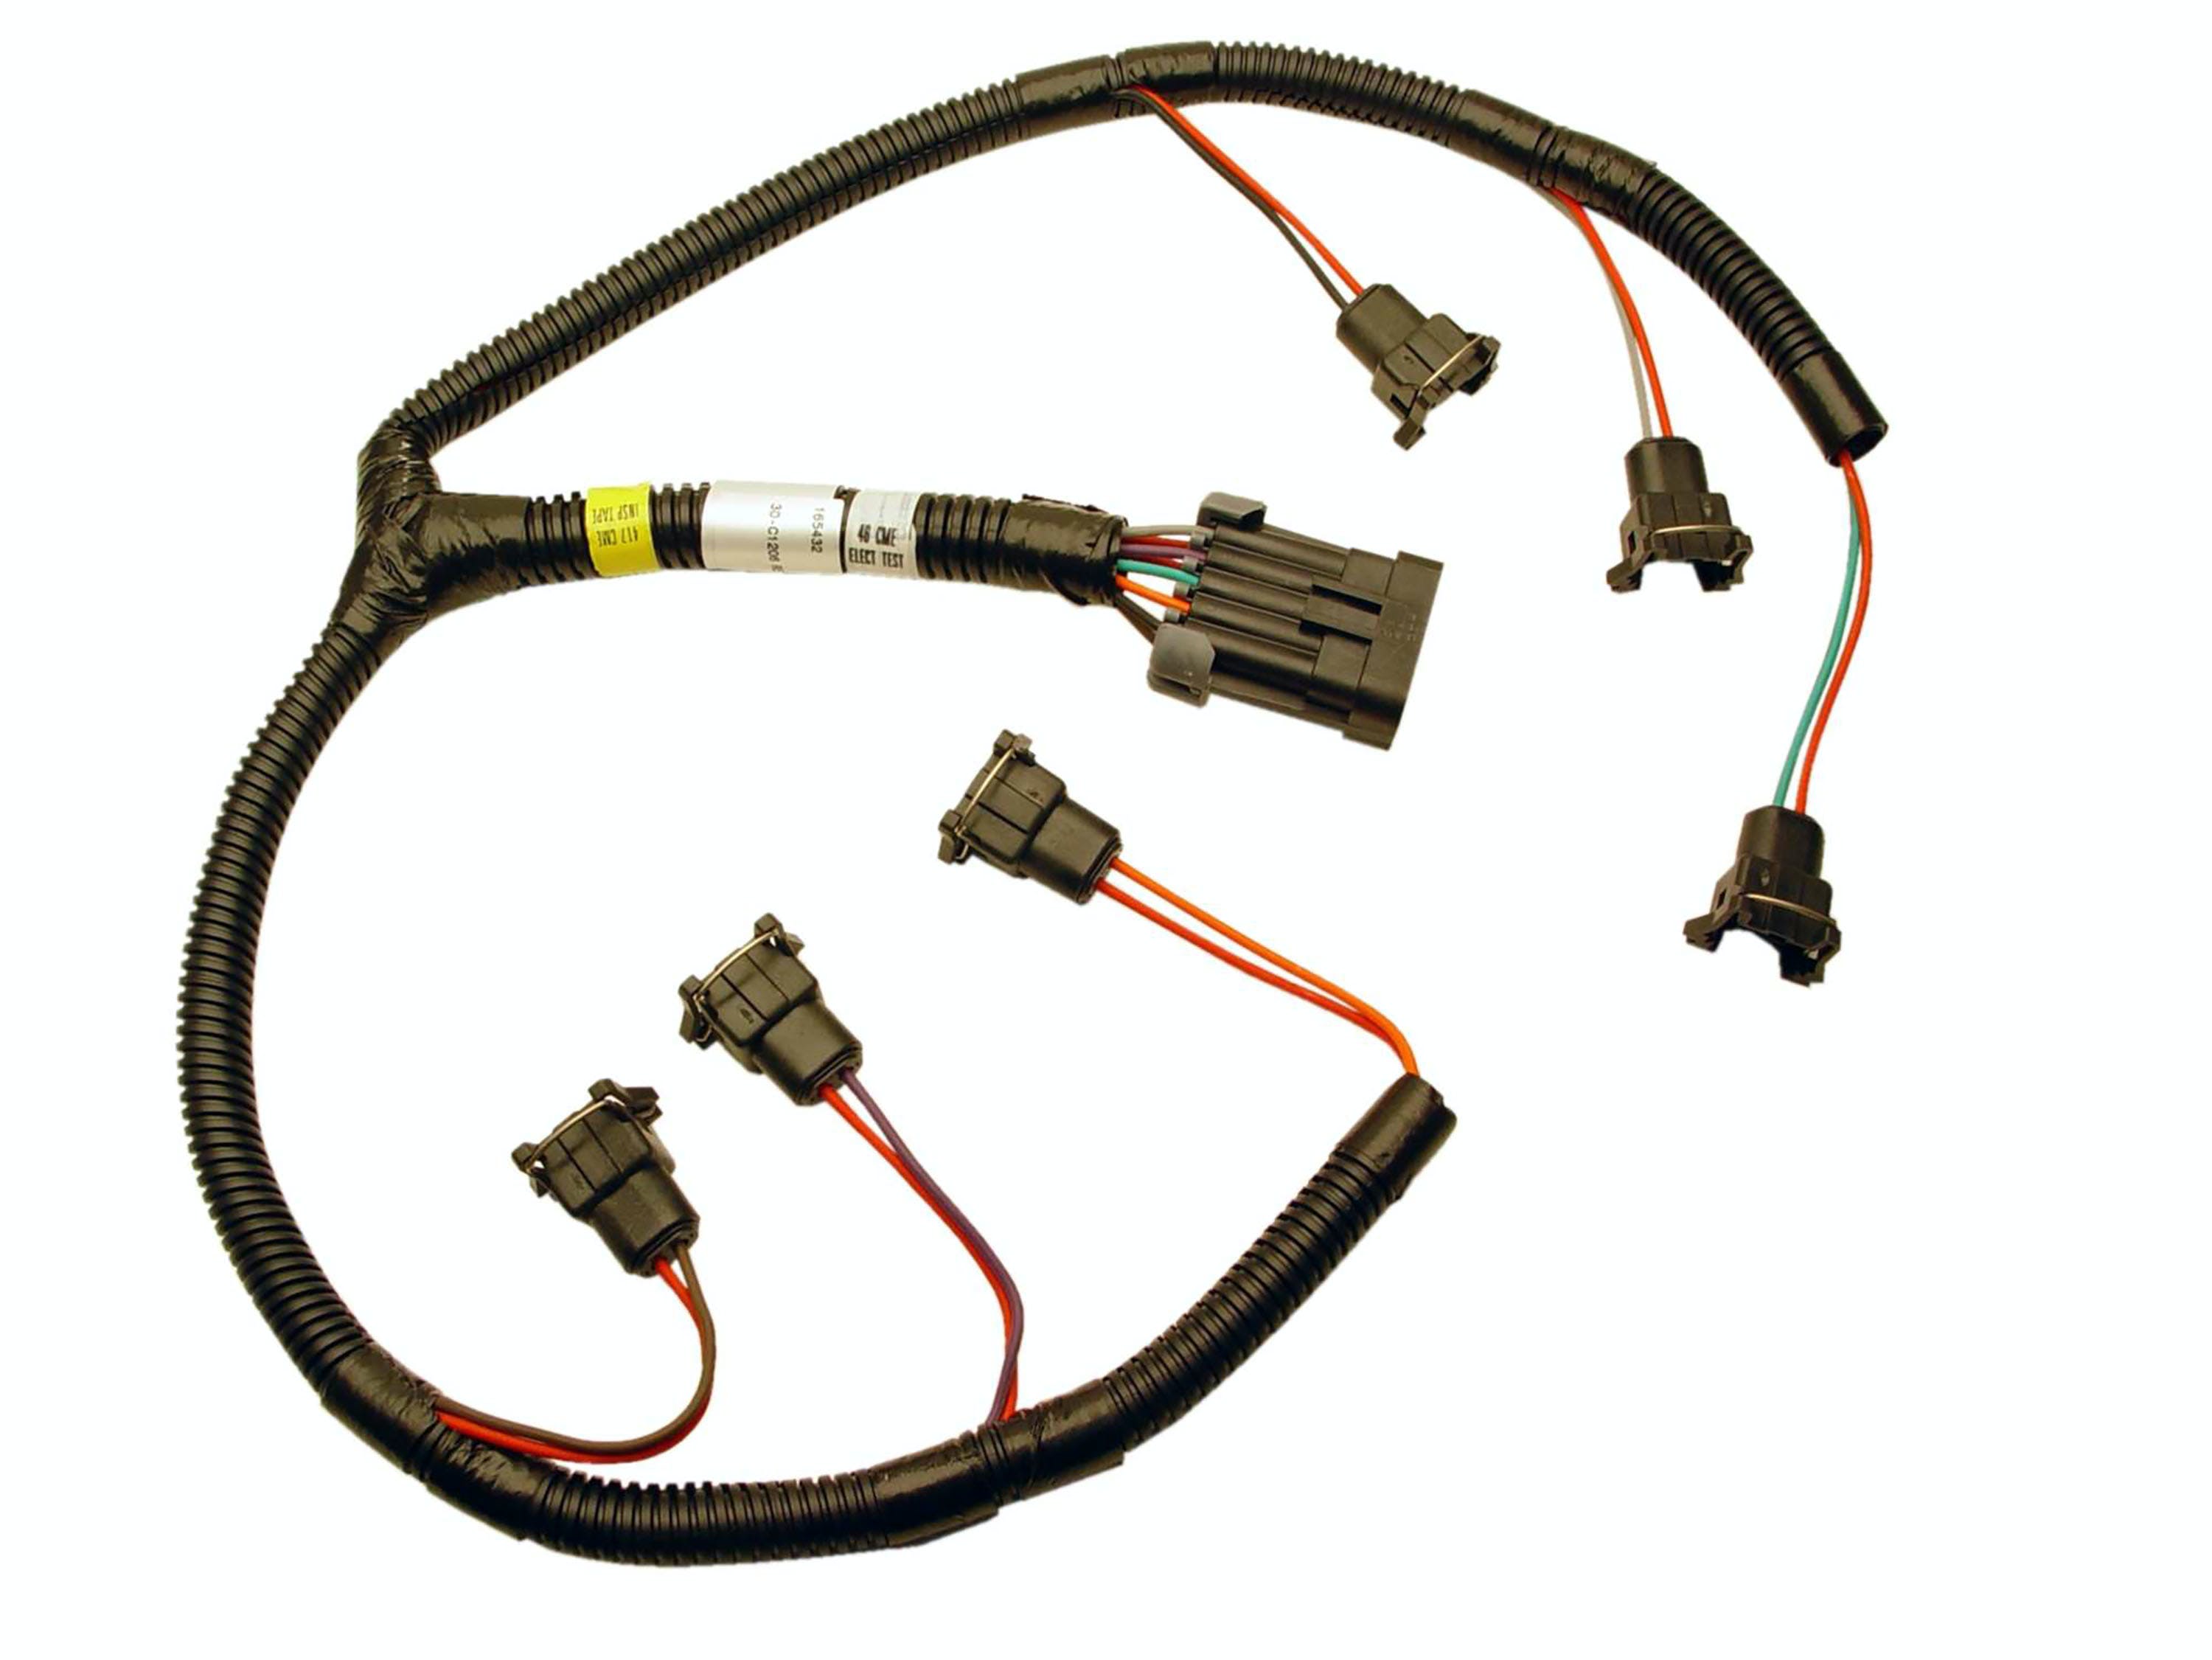 FAST - Fuel Air Spark Technology 301206 XFI Fuel Inector Harness for Buick V6 engines.